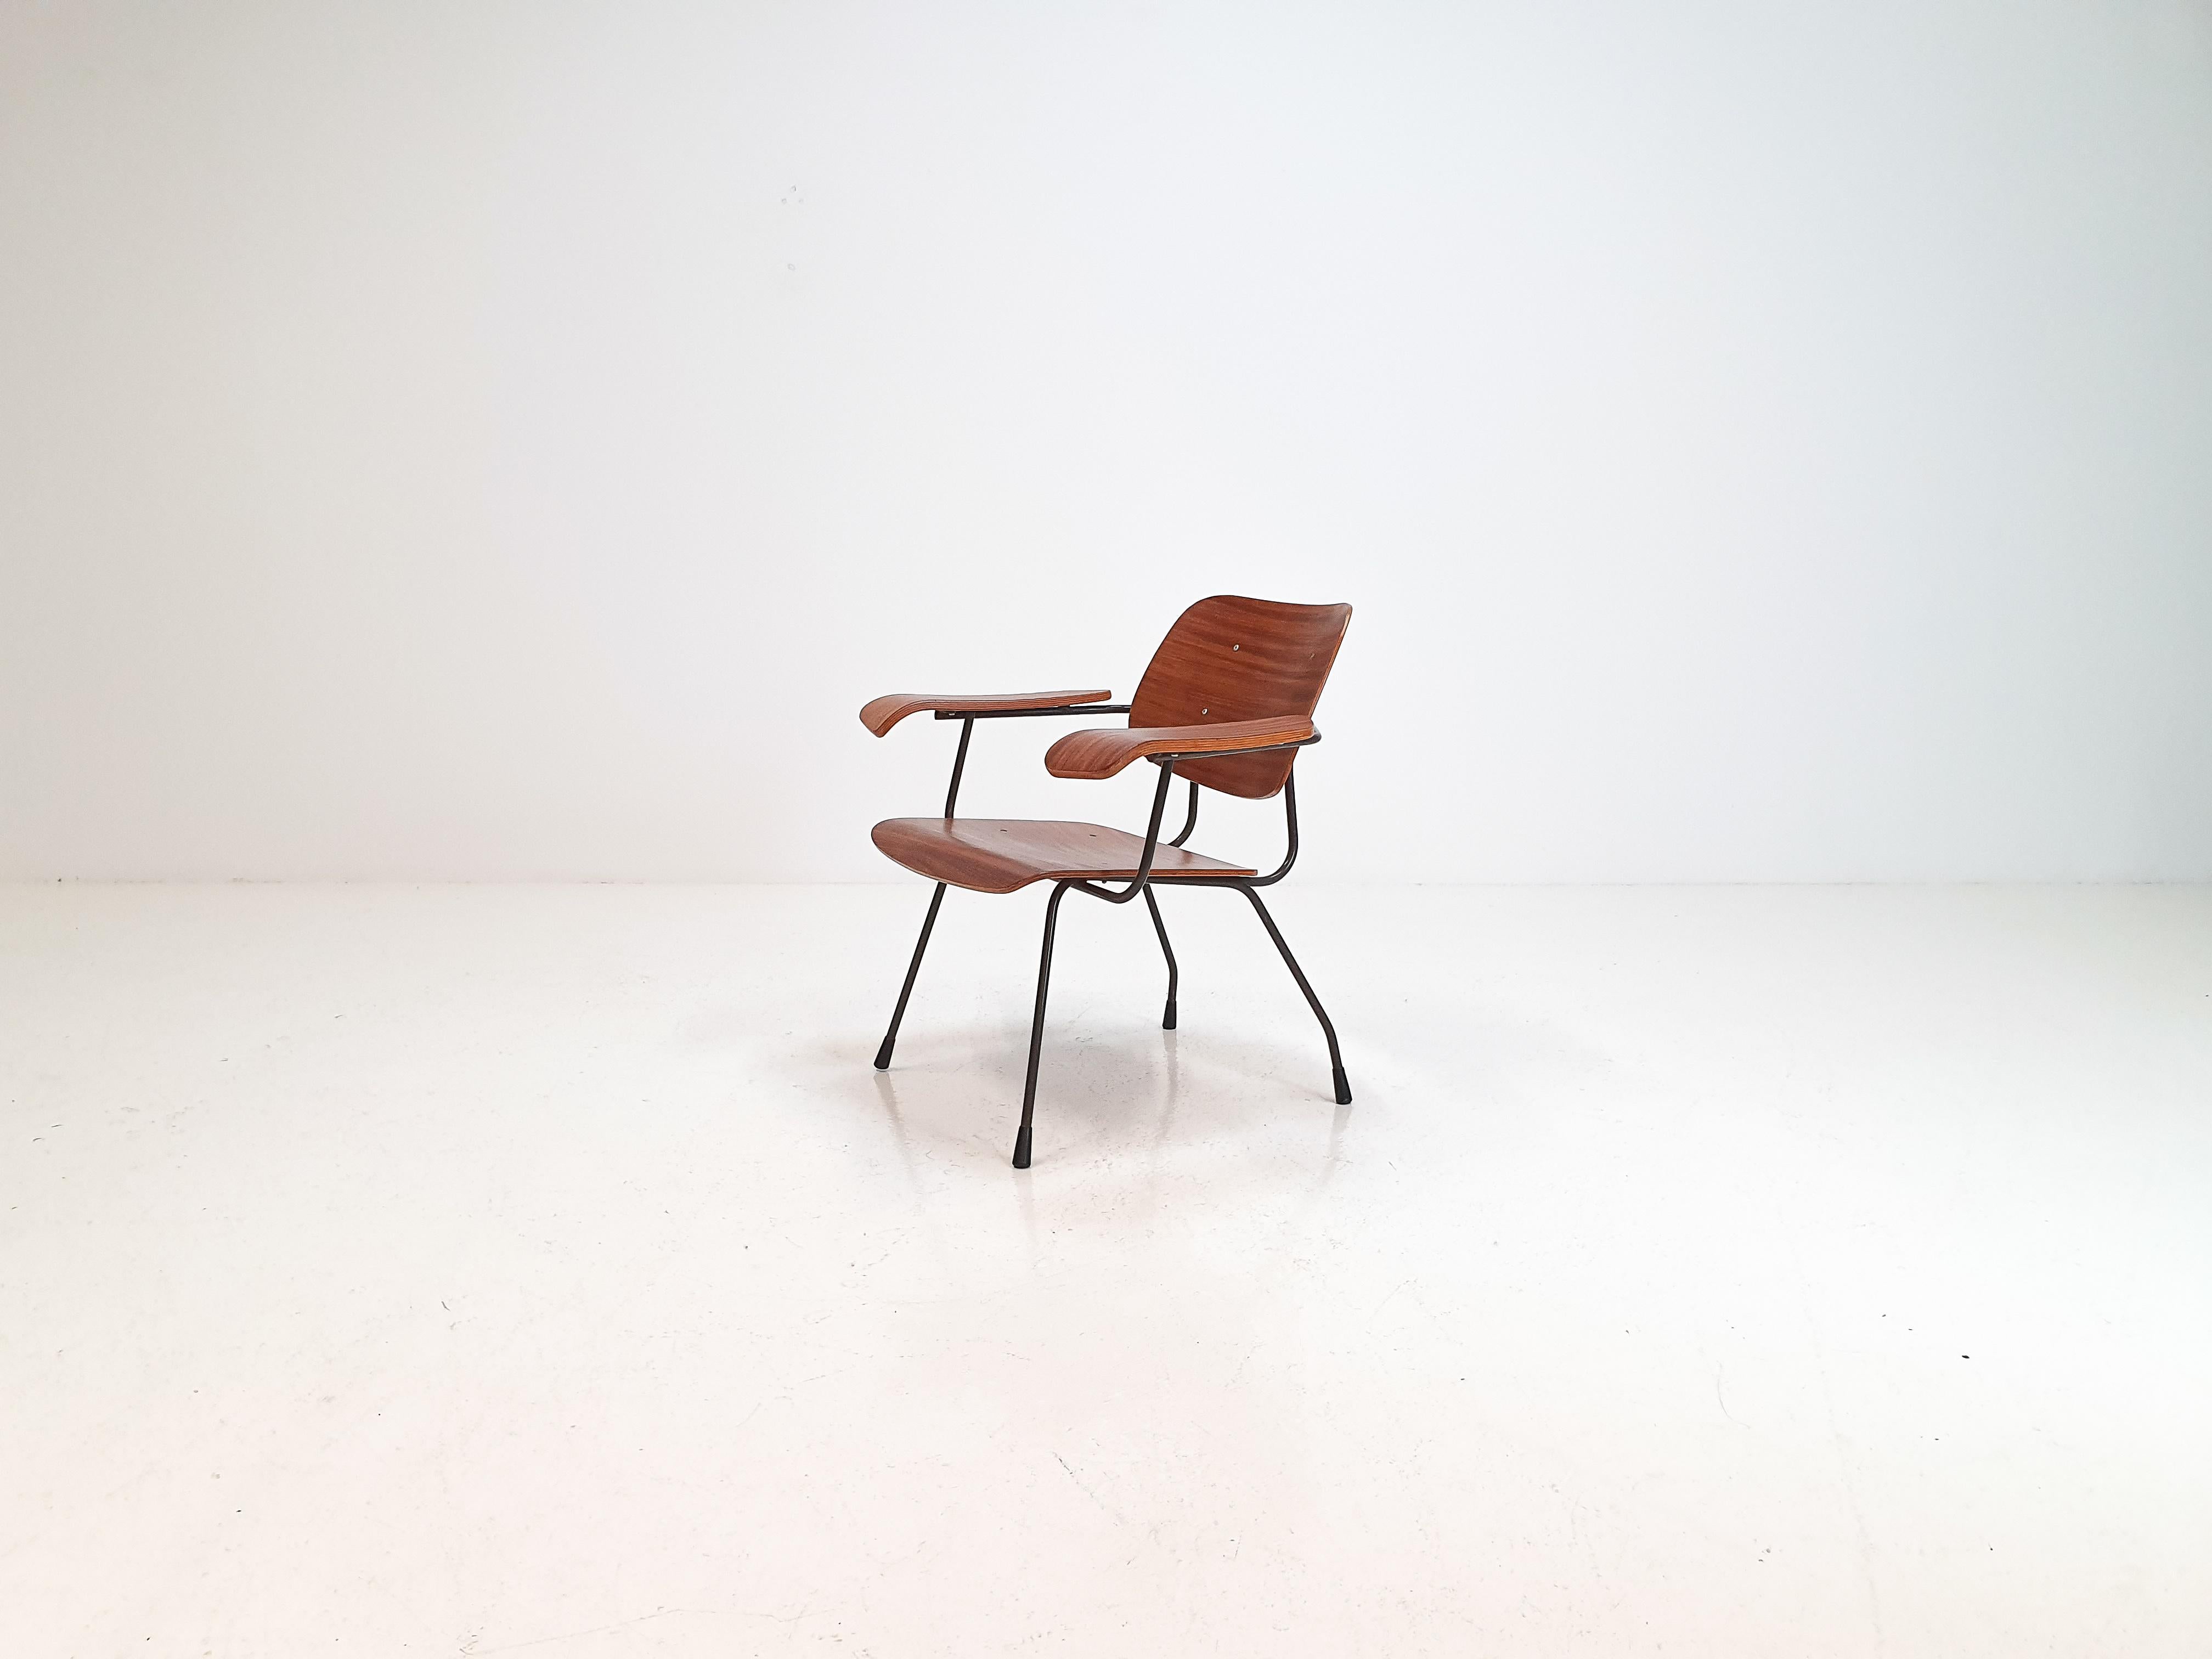 A Model 8000 easy chair by Tjerk Reijenga for Pilastro, Netherlands, 1960s

An important and rare piece of Dutch minimalist industrial design by Tjerk Reijenga, produced in small numbers by Pilastro in the 1960s. Eye-catching with its steel frame,